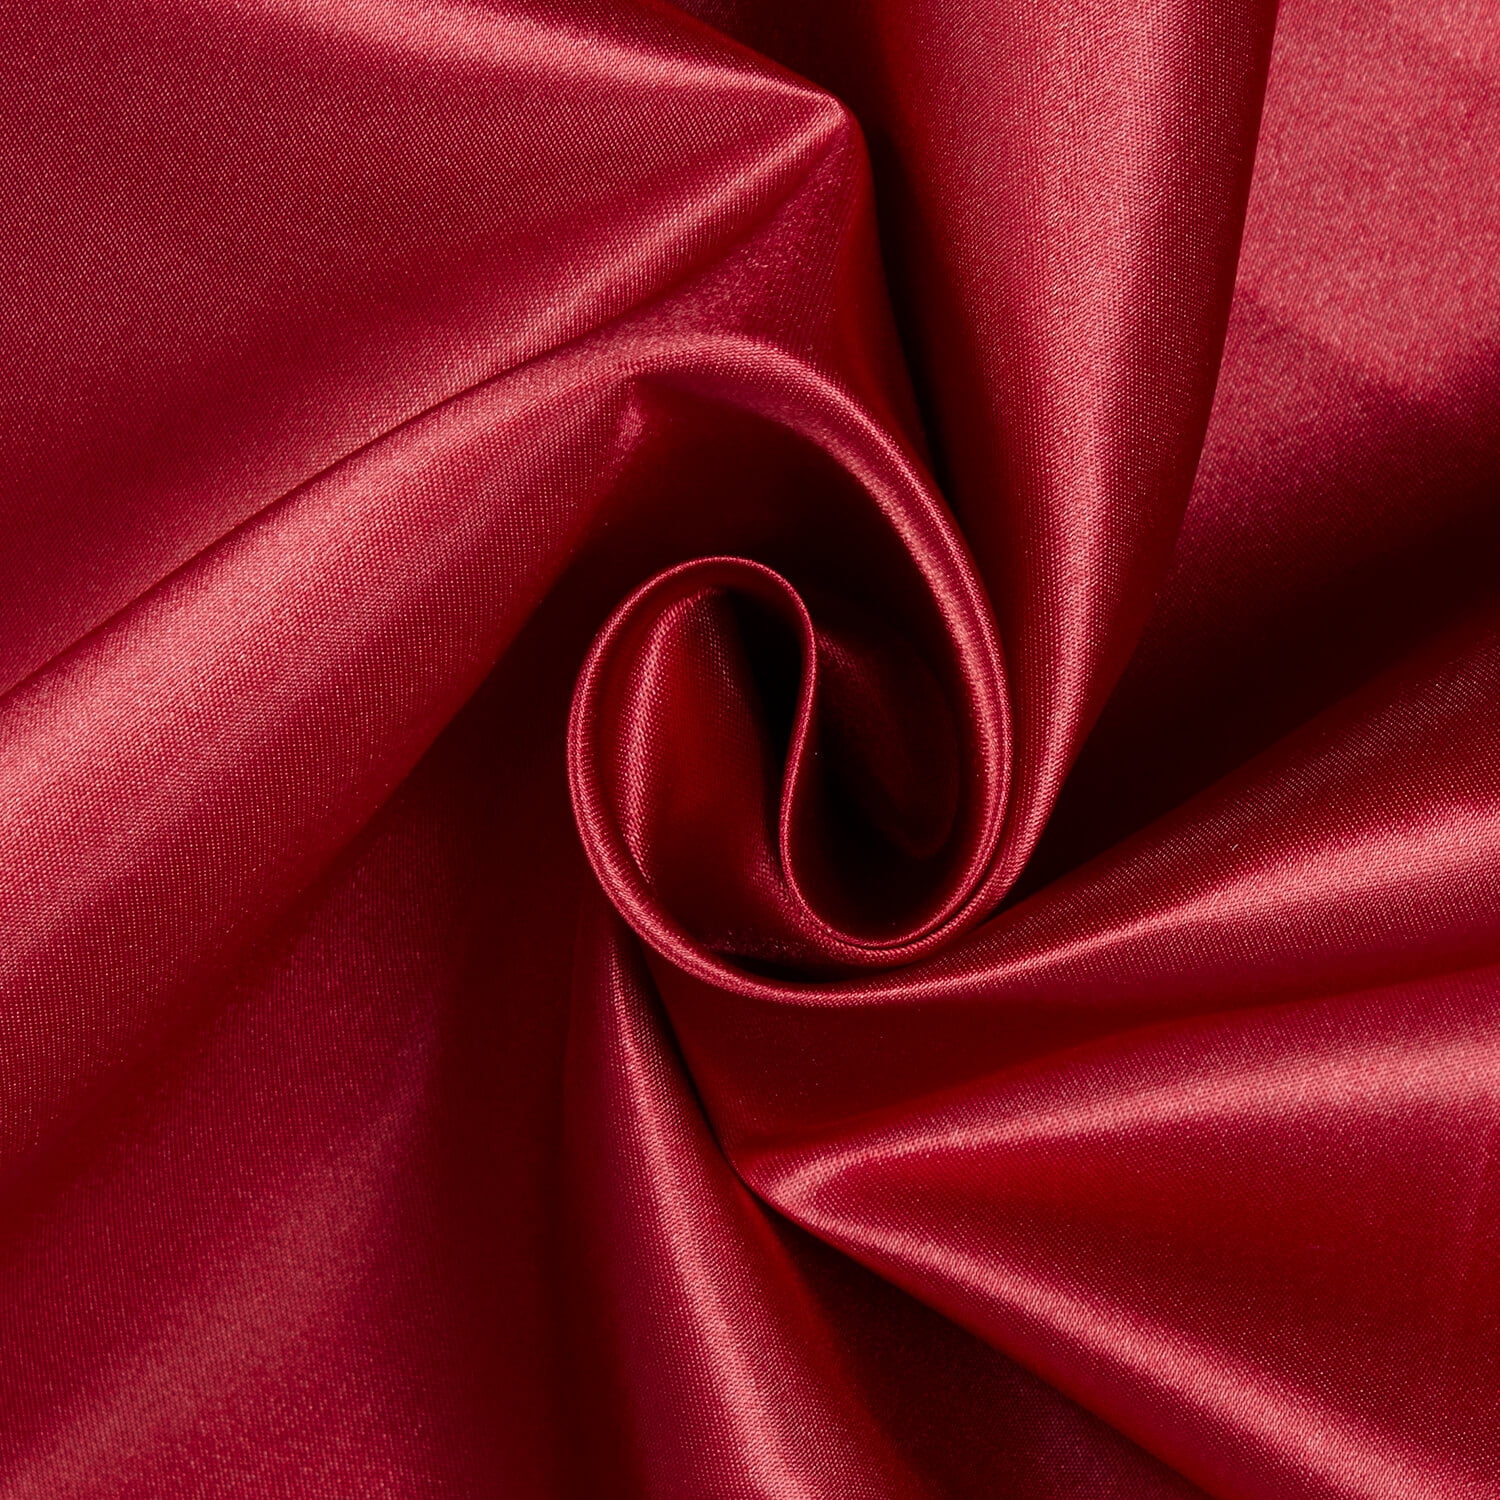  Red Satin Fabric 60 Inch Wide – By the Yard - For Weddings,  Decor, Gowns, Sheets, Costumes, Dresses, Etc : Arts, Crafts & Sewing